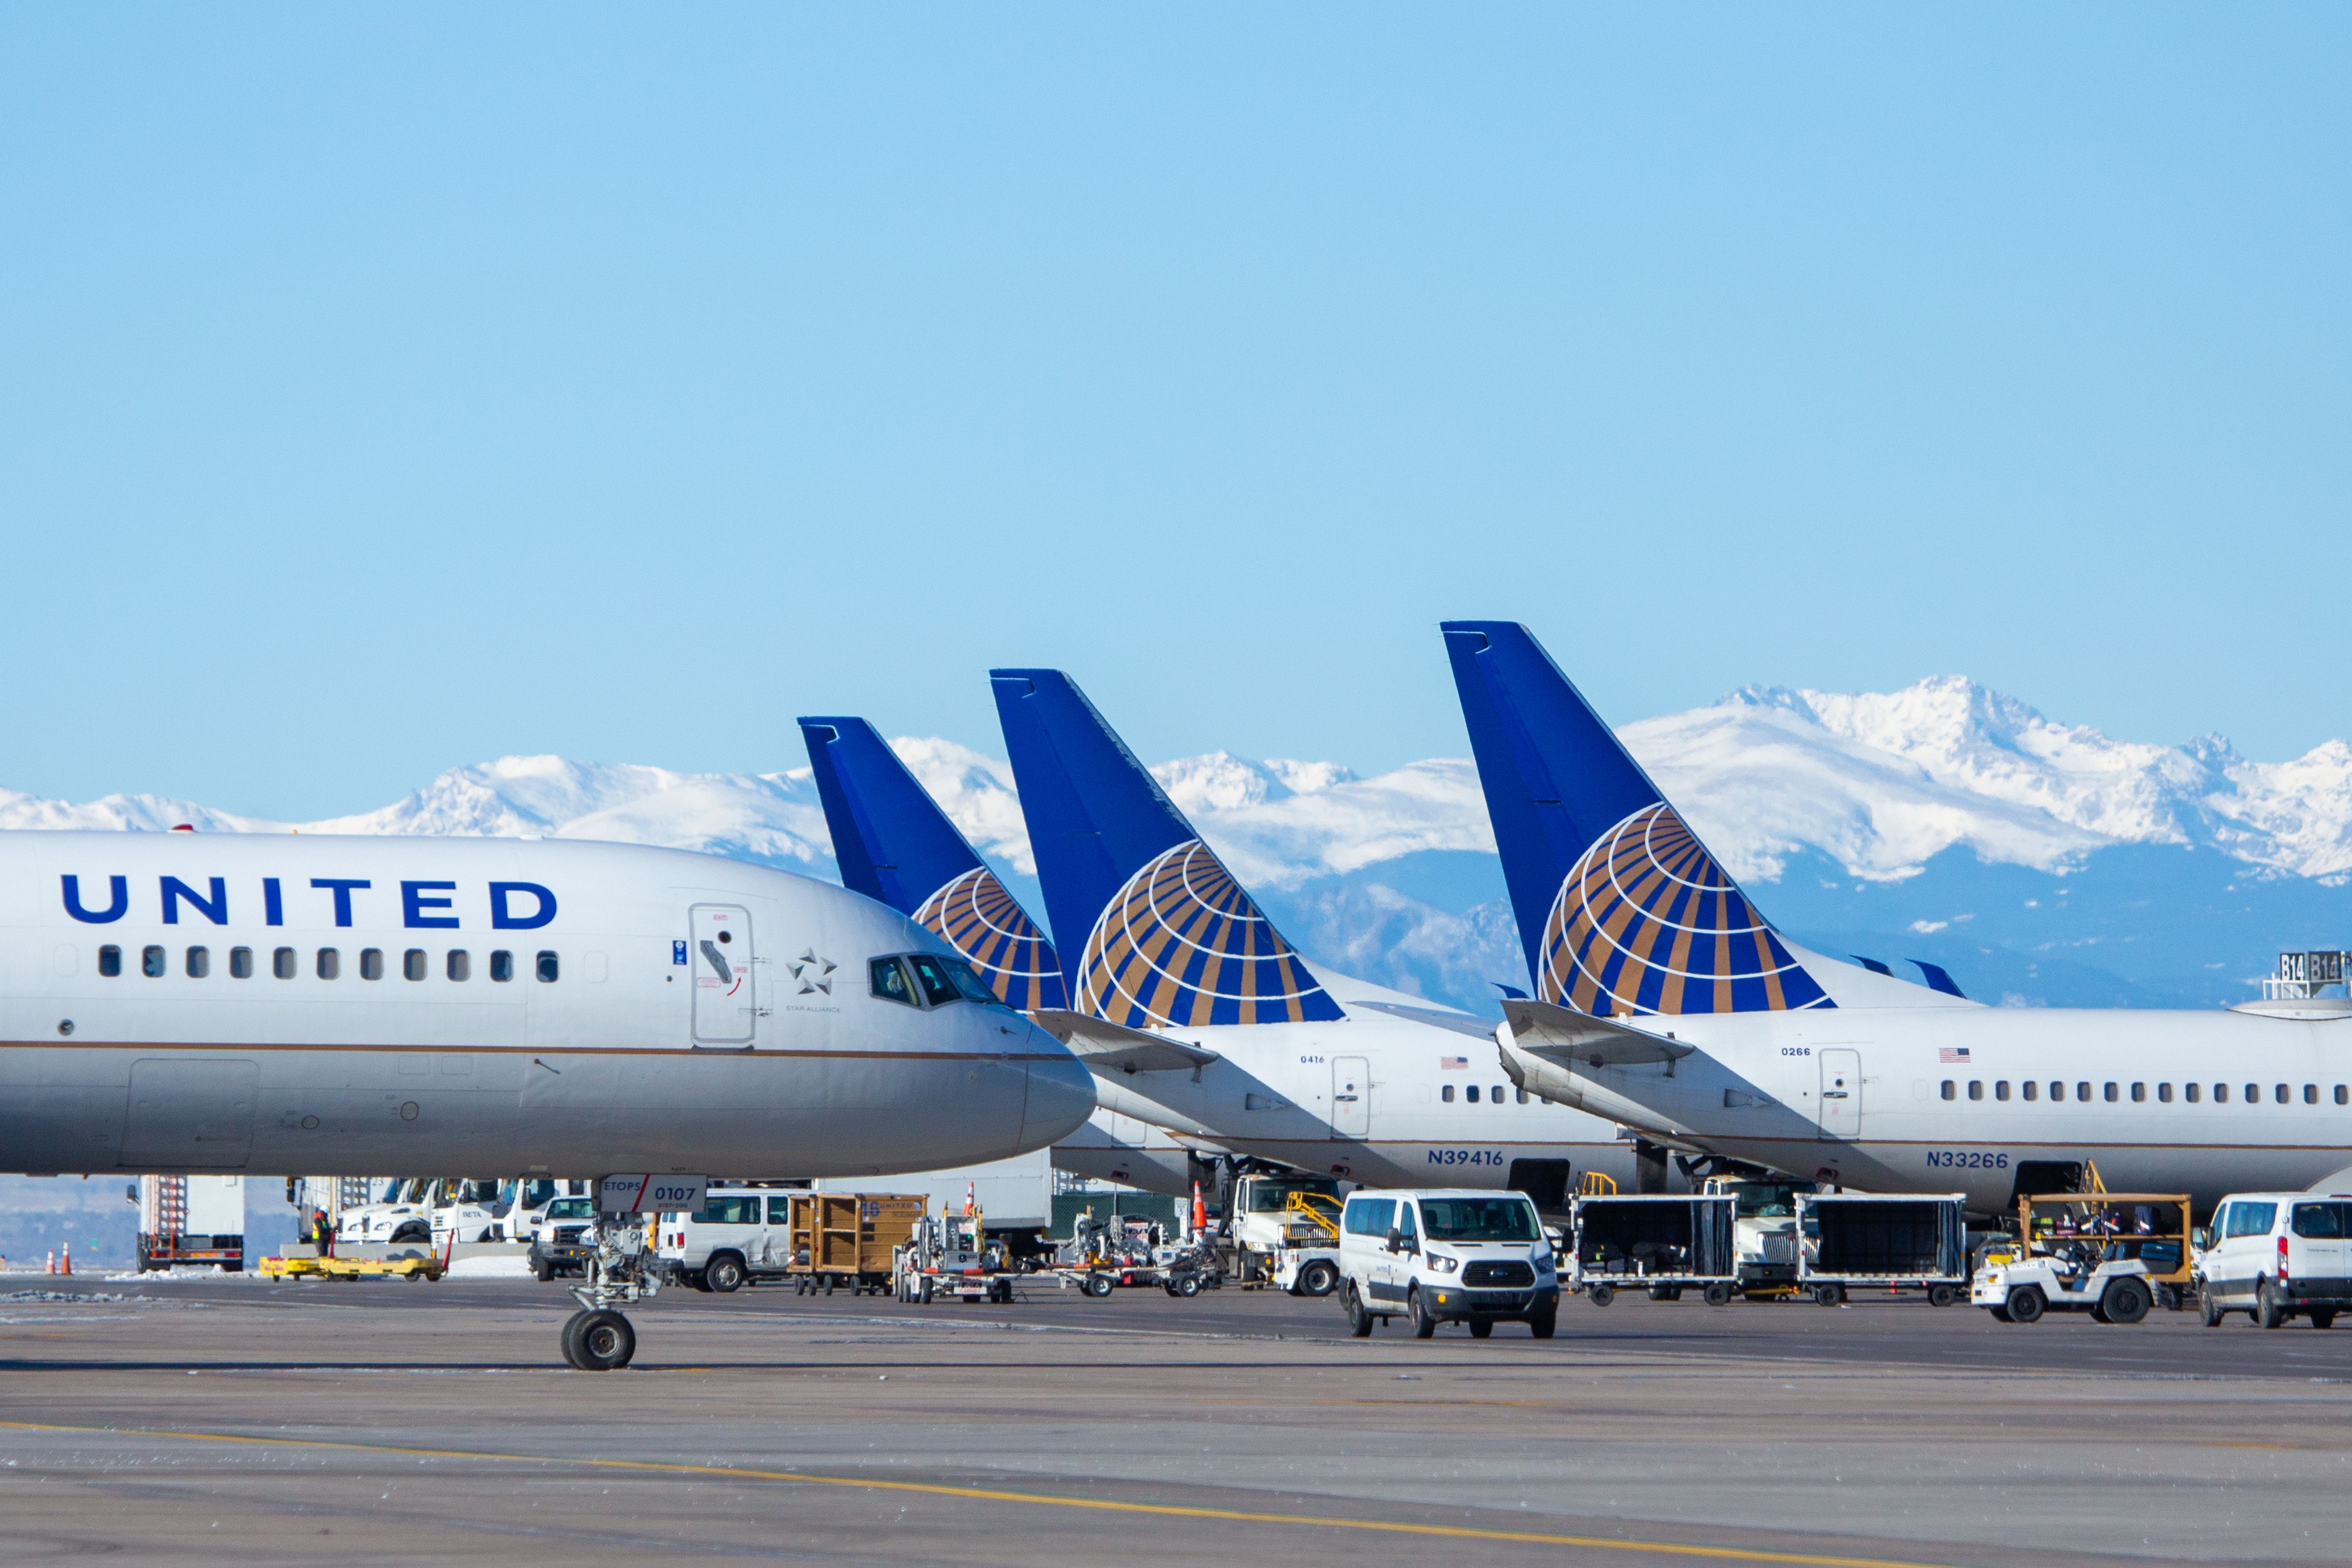 United Airlines Airplanes at terminal